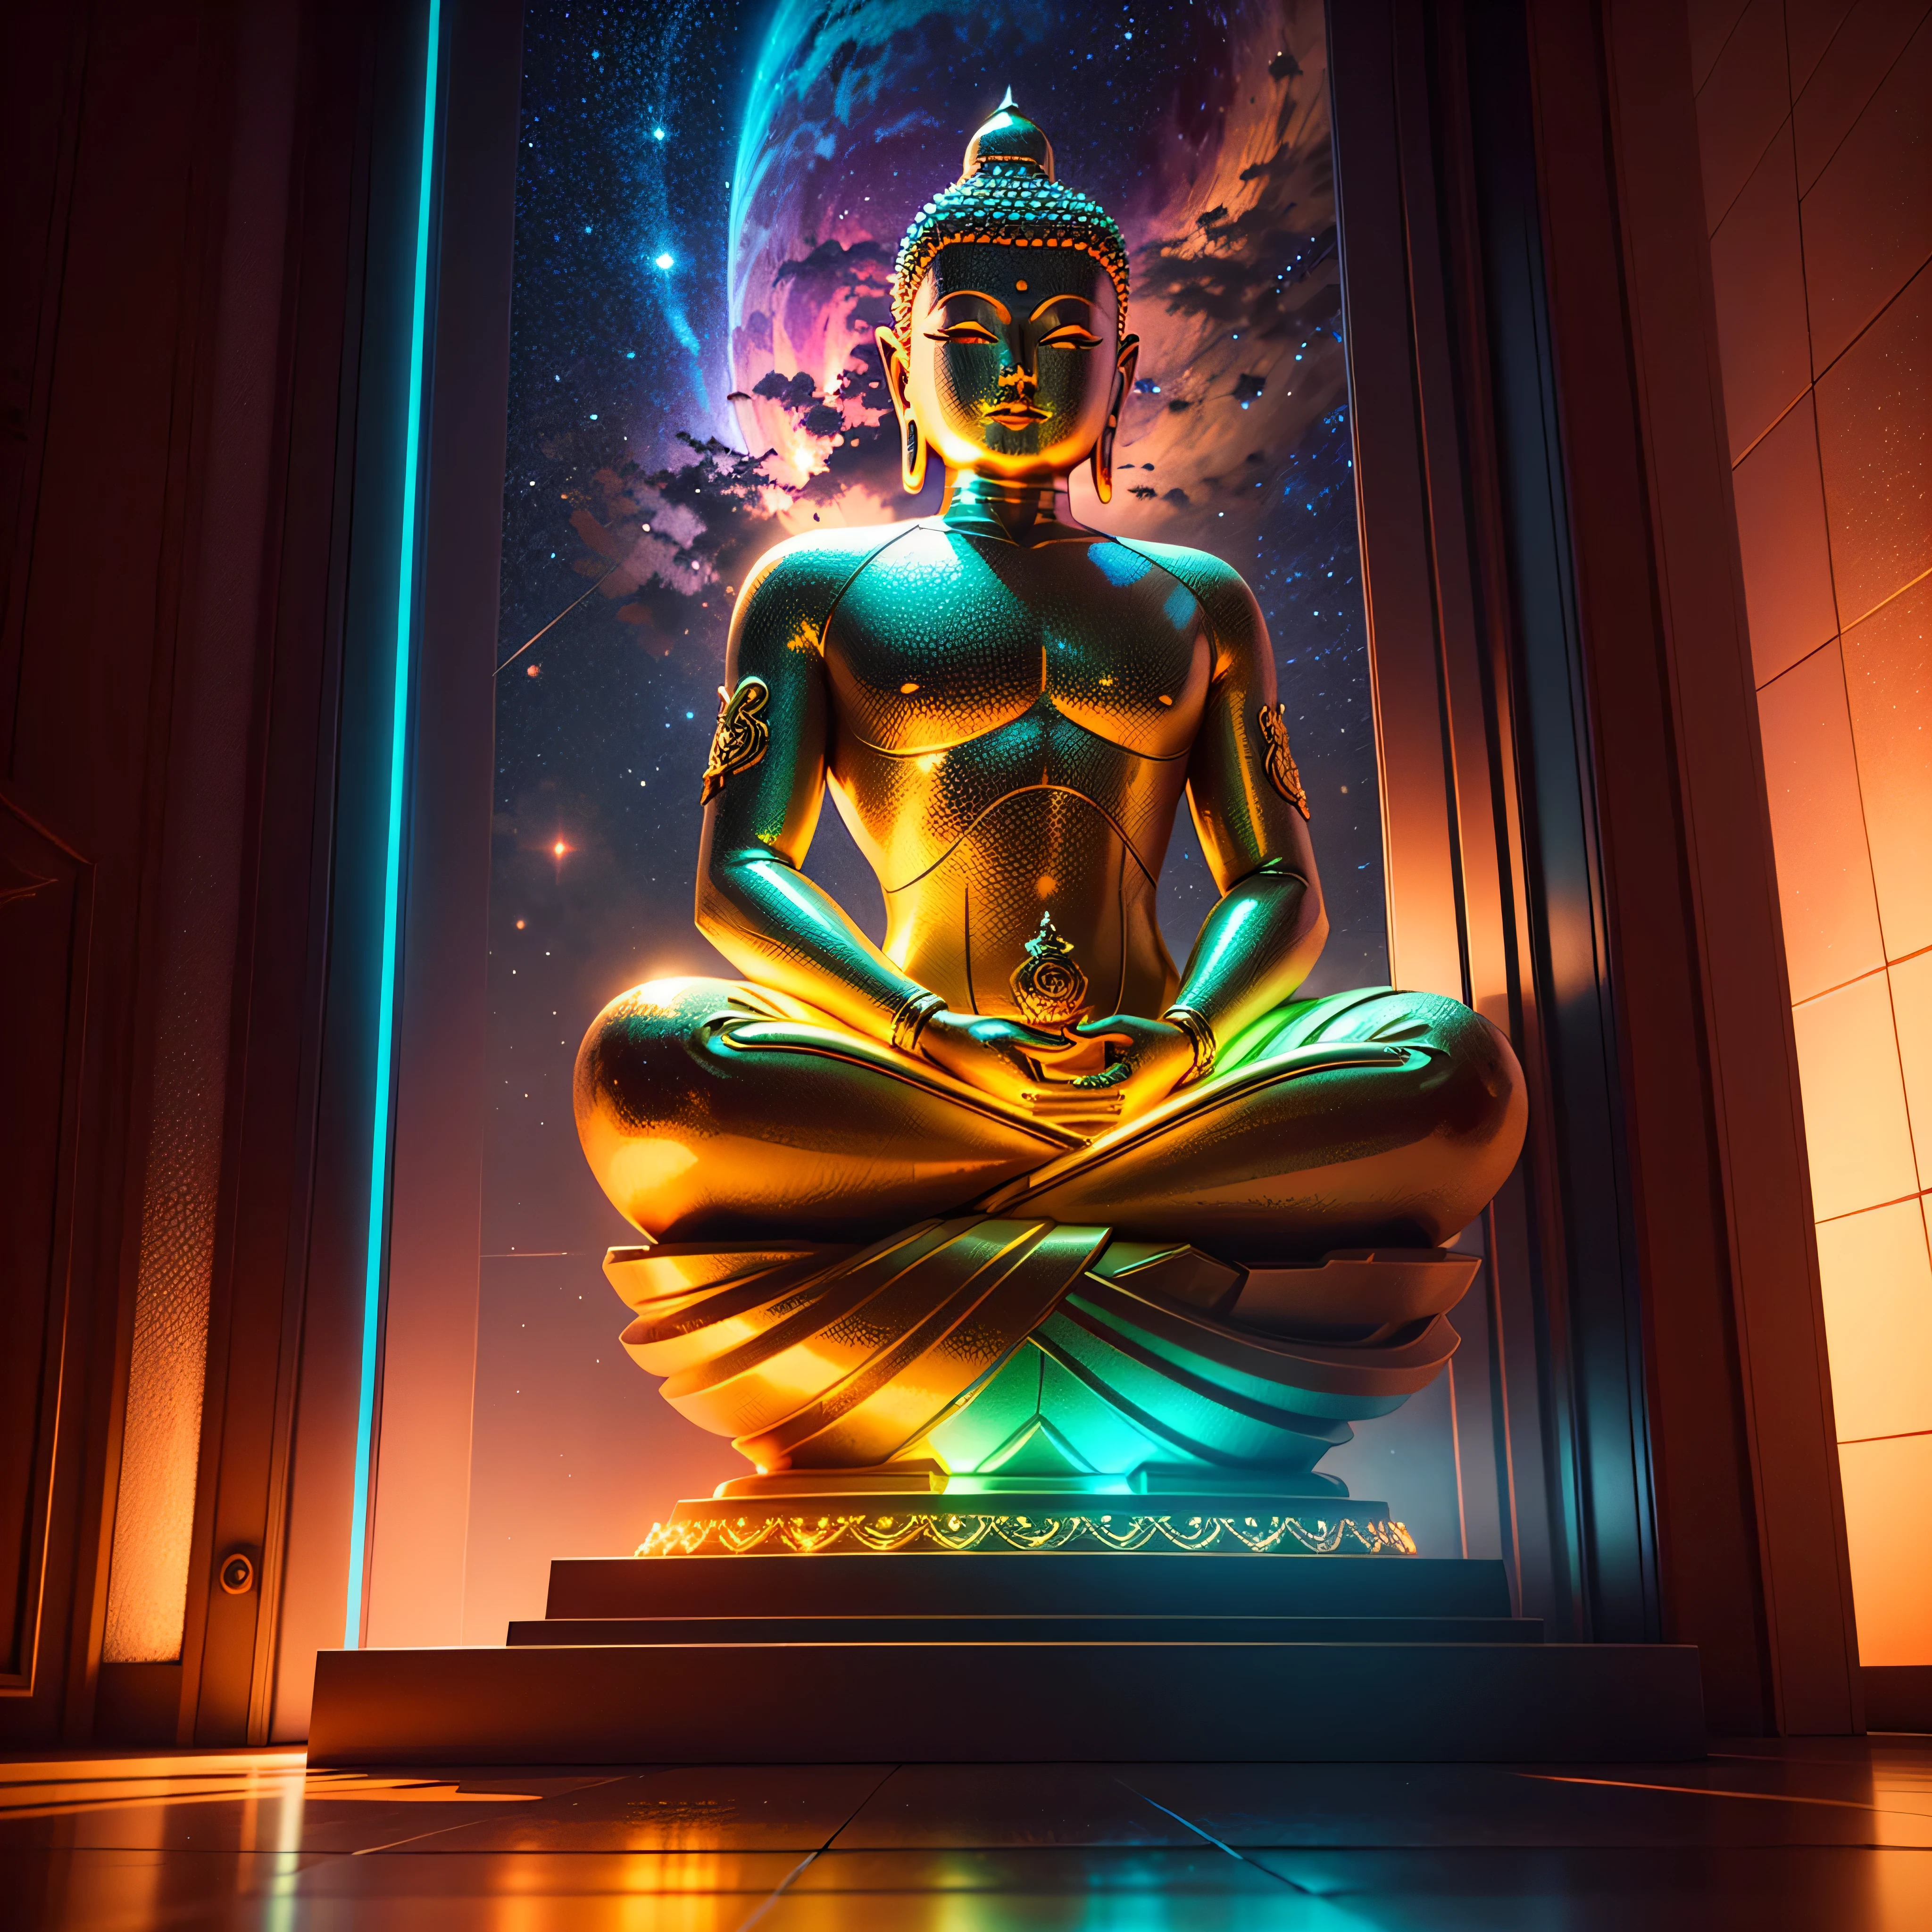 Will-o'-the-wisp dazzling Symmetrical Duddha_Interstellar (Galaxy stars Nebula Spacious Sunrise evening_glow distant_view Sunset rich_colors colorful wide-angle_lens shooting_evening positive_film naturalistic_style)，A highly detailed, futuristic scene with a vibrant color palette and neon lights. The focal point of the scene a magnificent Golden Buddha statue, radiating a sense of peace and tranquility. The statue made of pure gold and shines brightly, reflecting the neon lights around it. The surrounding environment filled with futuristic elements, such as sleek buildings, flying cars, and holographic advertisements. The colors in the scene are intense and vibrant, incorporating shades of blues, purples, pinks, and greens. The neon lights illuminate the surroundings, casting a surreal and vibrant glow. The overall atmosphere both awe-inspiring and serene, blending the traditional beauty of the Golden Buddha with the cutting-edge aesthetics of the future. Everything in the scene highly detailed and realistic, with every intricate feature of the Buddha statue captured flawlessly. The lighting carefully designed to highlight the beauty of the statue and create a mesmerizing ambiance.optimal bright_color dappled_sunLight meticulously intricate ultra_high-details ultra_high-res hyper pro-Photo-realistic ultra_high-quality ultra_high-def UHD XT3 DSLR HDR extreme improved Octane-rendered opengl-shaders glsl-shader romm rgb pbr shading 3DCG fxaa global illumination cgi vfx sfx fkaa txaa rtx ssao post-processing post-production cell-shading tone-mapping Ultra_sharpness focus accurate max saturate reflex analogique Vivid DSLR color-coded luminescence volumetric Cinematic_Sunrise lightning contrast incandescent Cristallines floraison zentangle fleuraison varied multi etc. --s 1000 --c 20 --q 20 --chaos 100